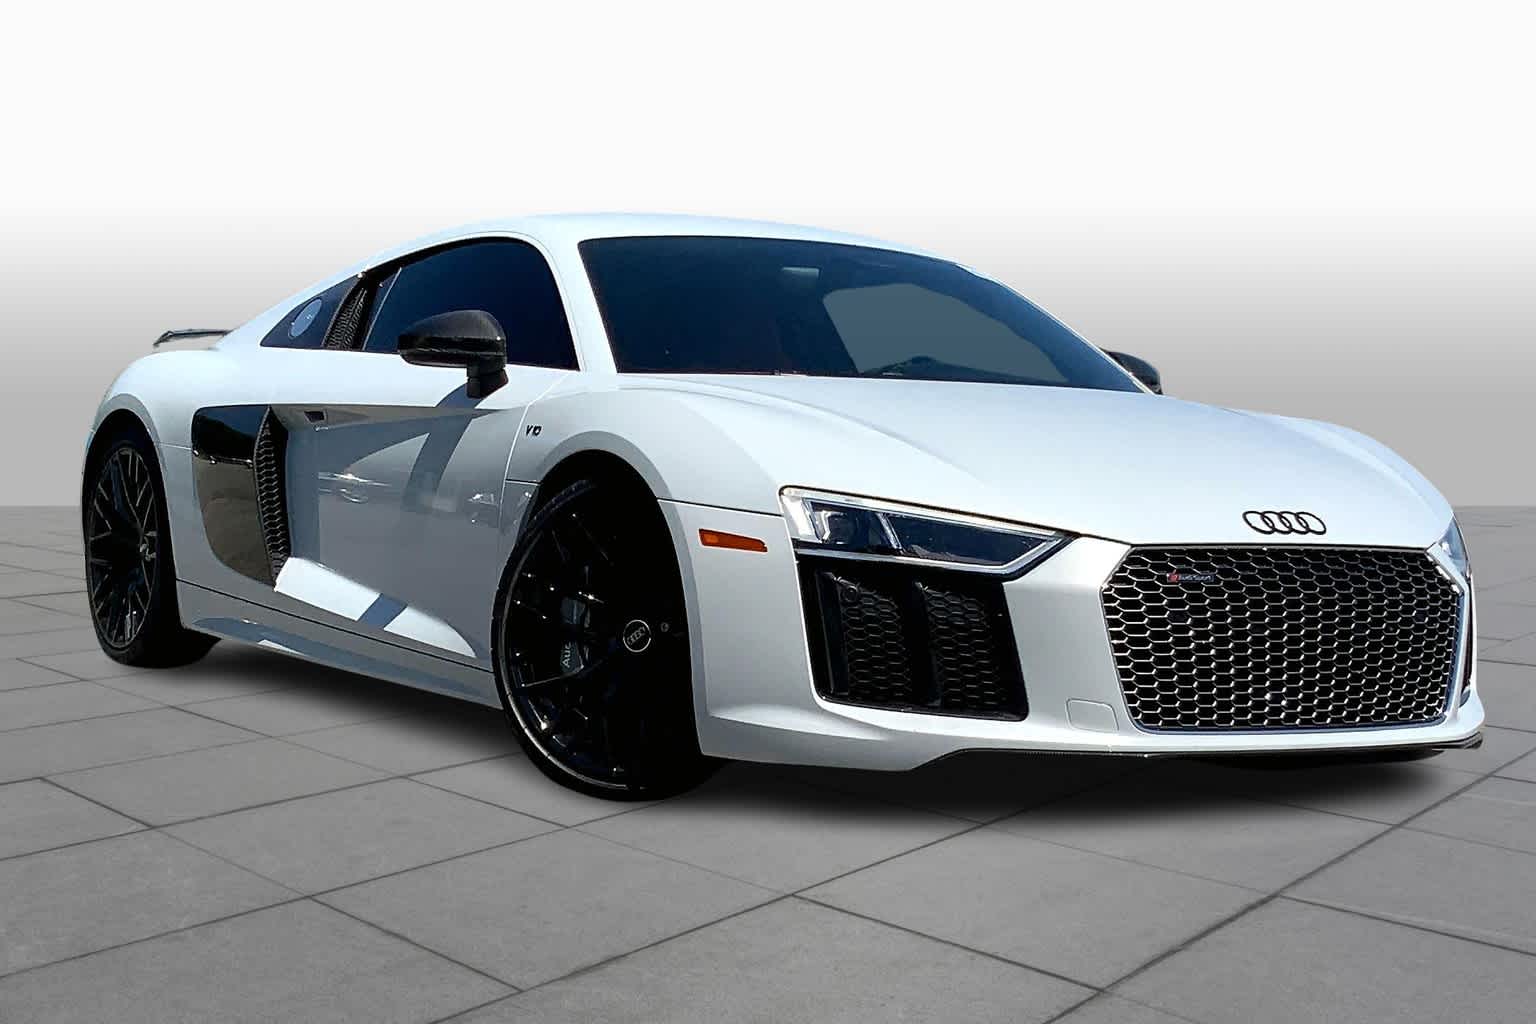 Used 2018 Audi R8 Base with VIN WUAKBAFX0J7900230 for sale in Peabody, MA